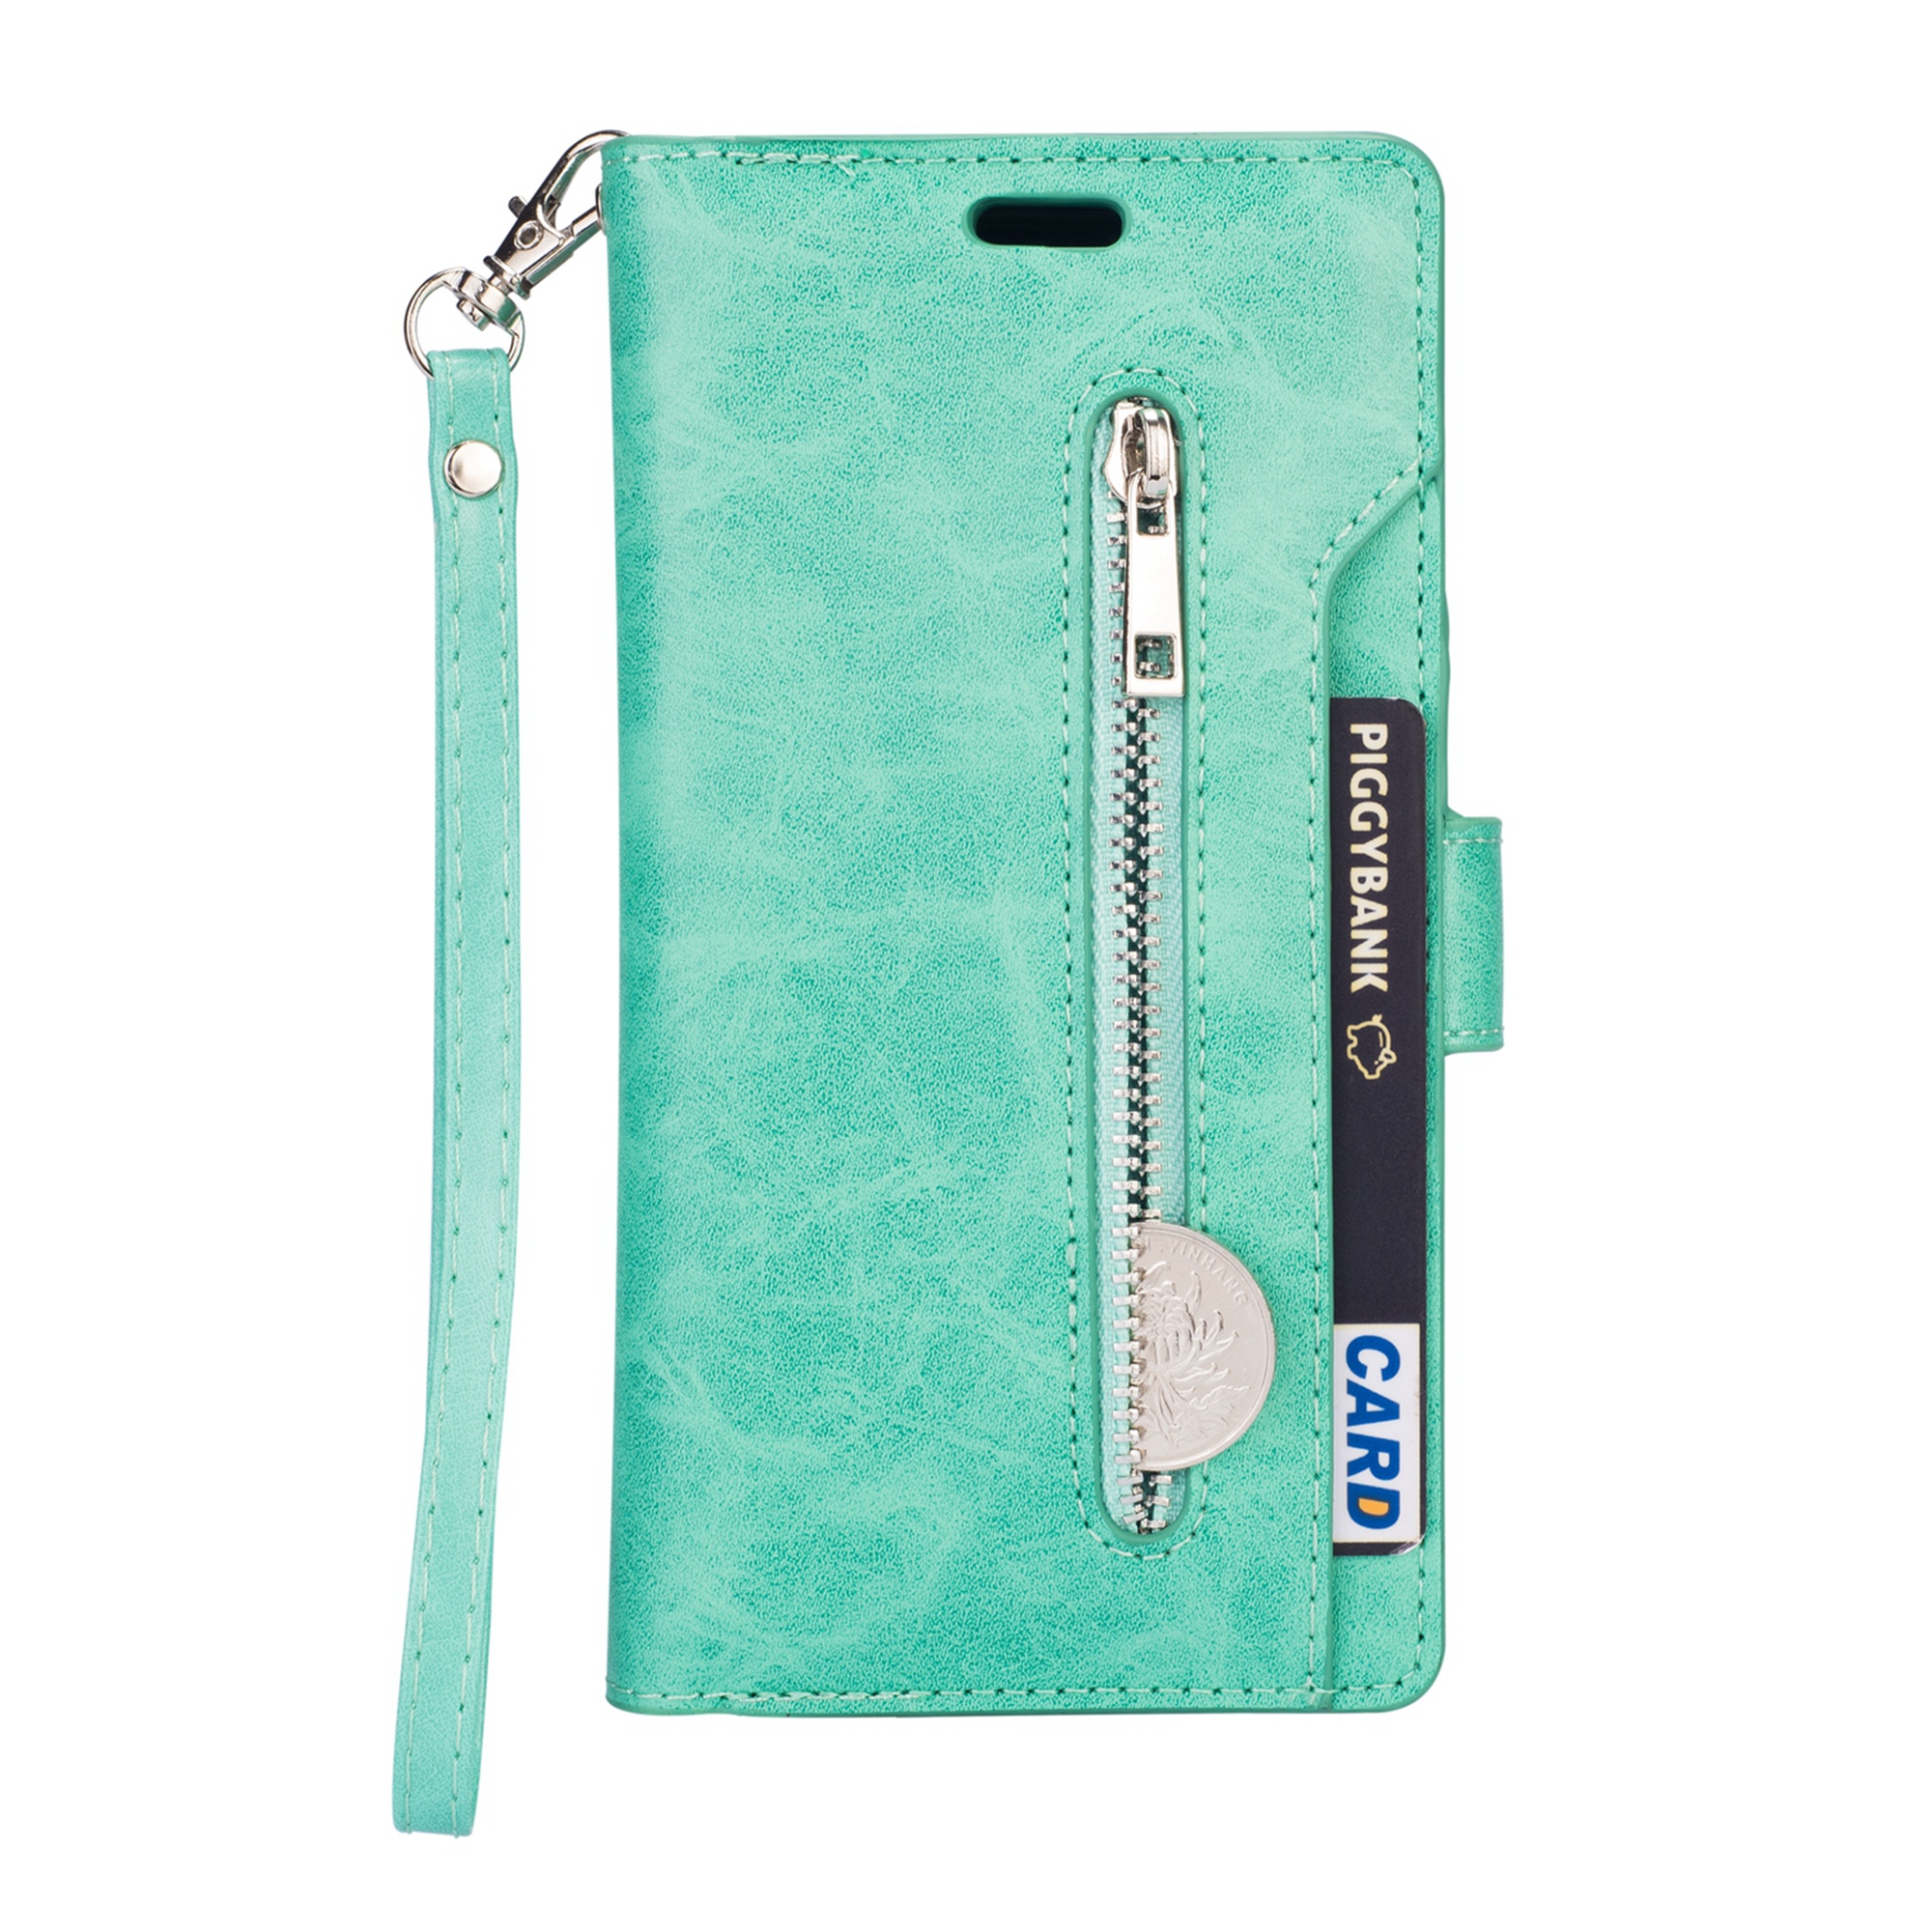 iPhone 11 Pro Max 6.5 inch Wallet Case, Dteck 9 Card Slots Premium Leather Zipper Purse case Flip Kickstand Folio Magnetic with Wrist Strap Credit Cash Cover For Apple iPhone 11 Pro Max, Mint - image 3 of 7